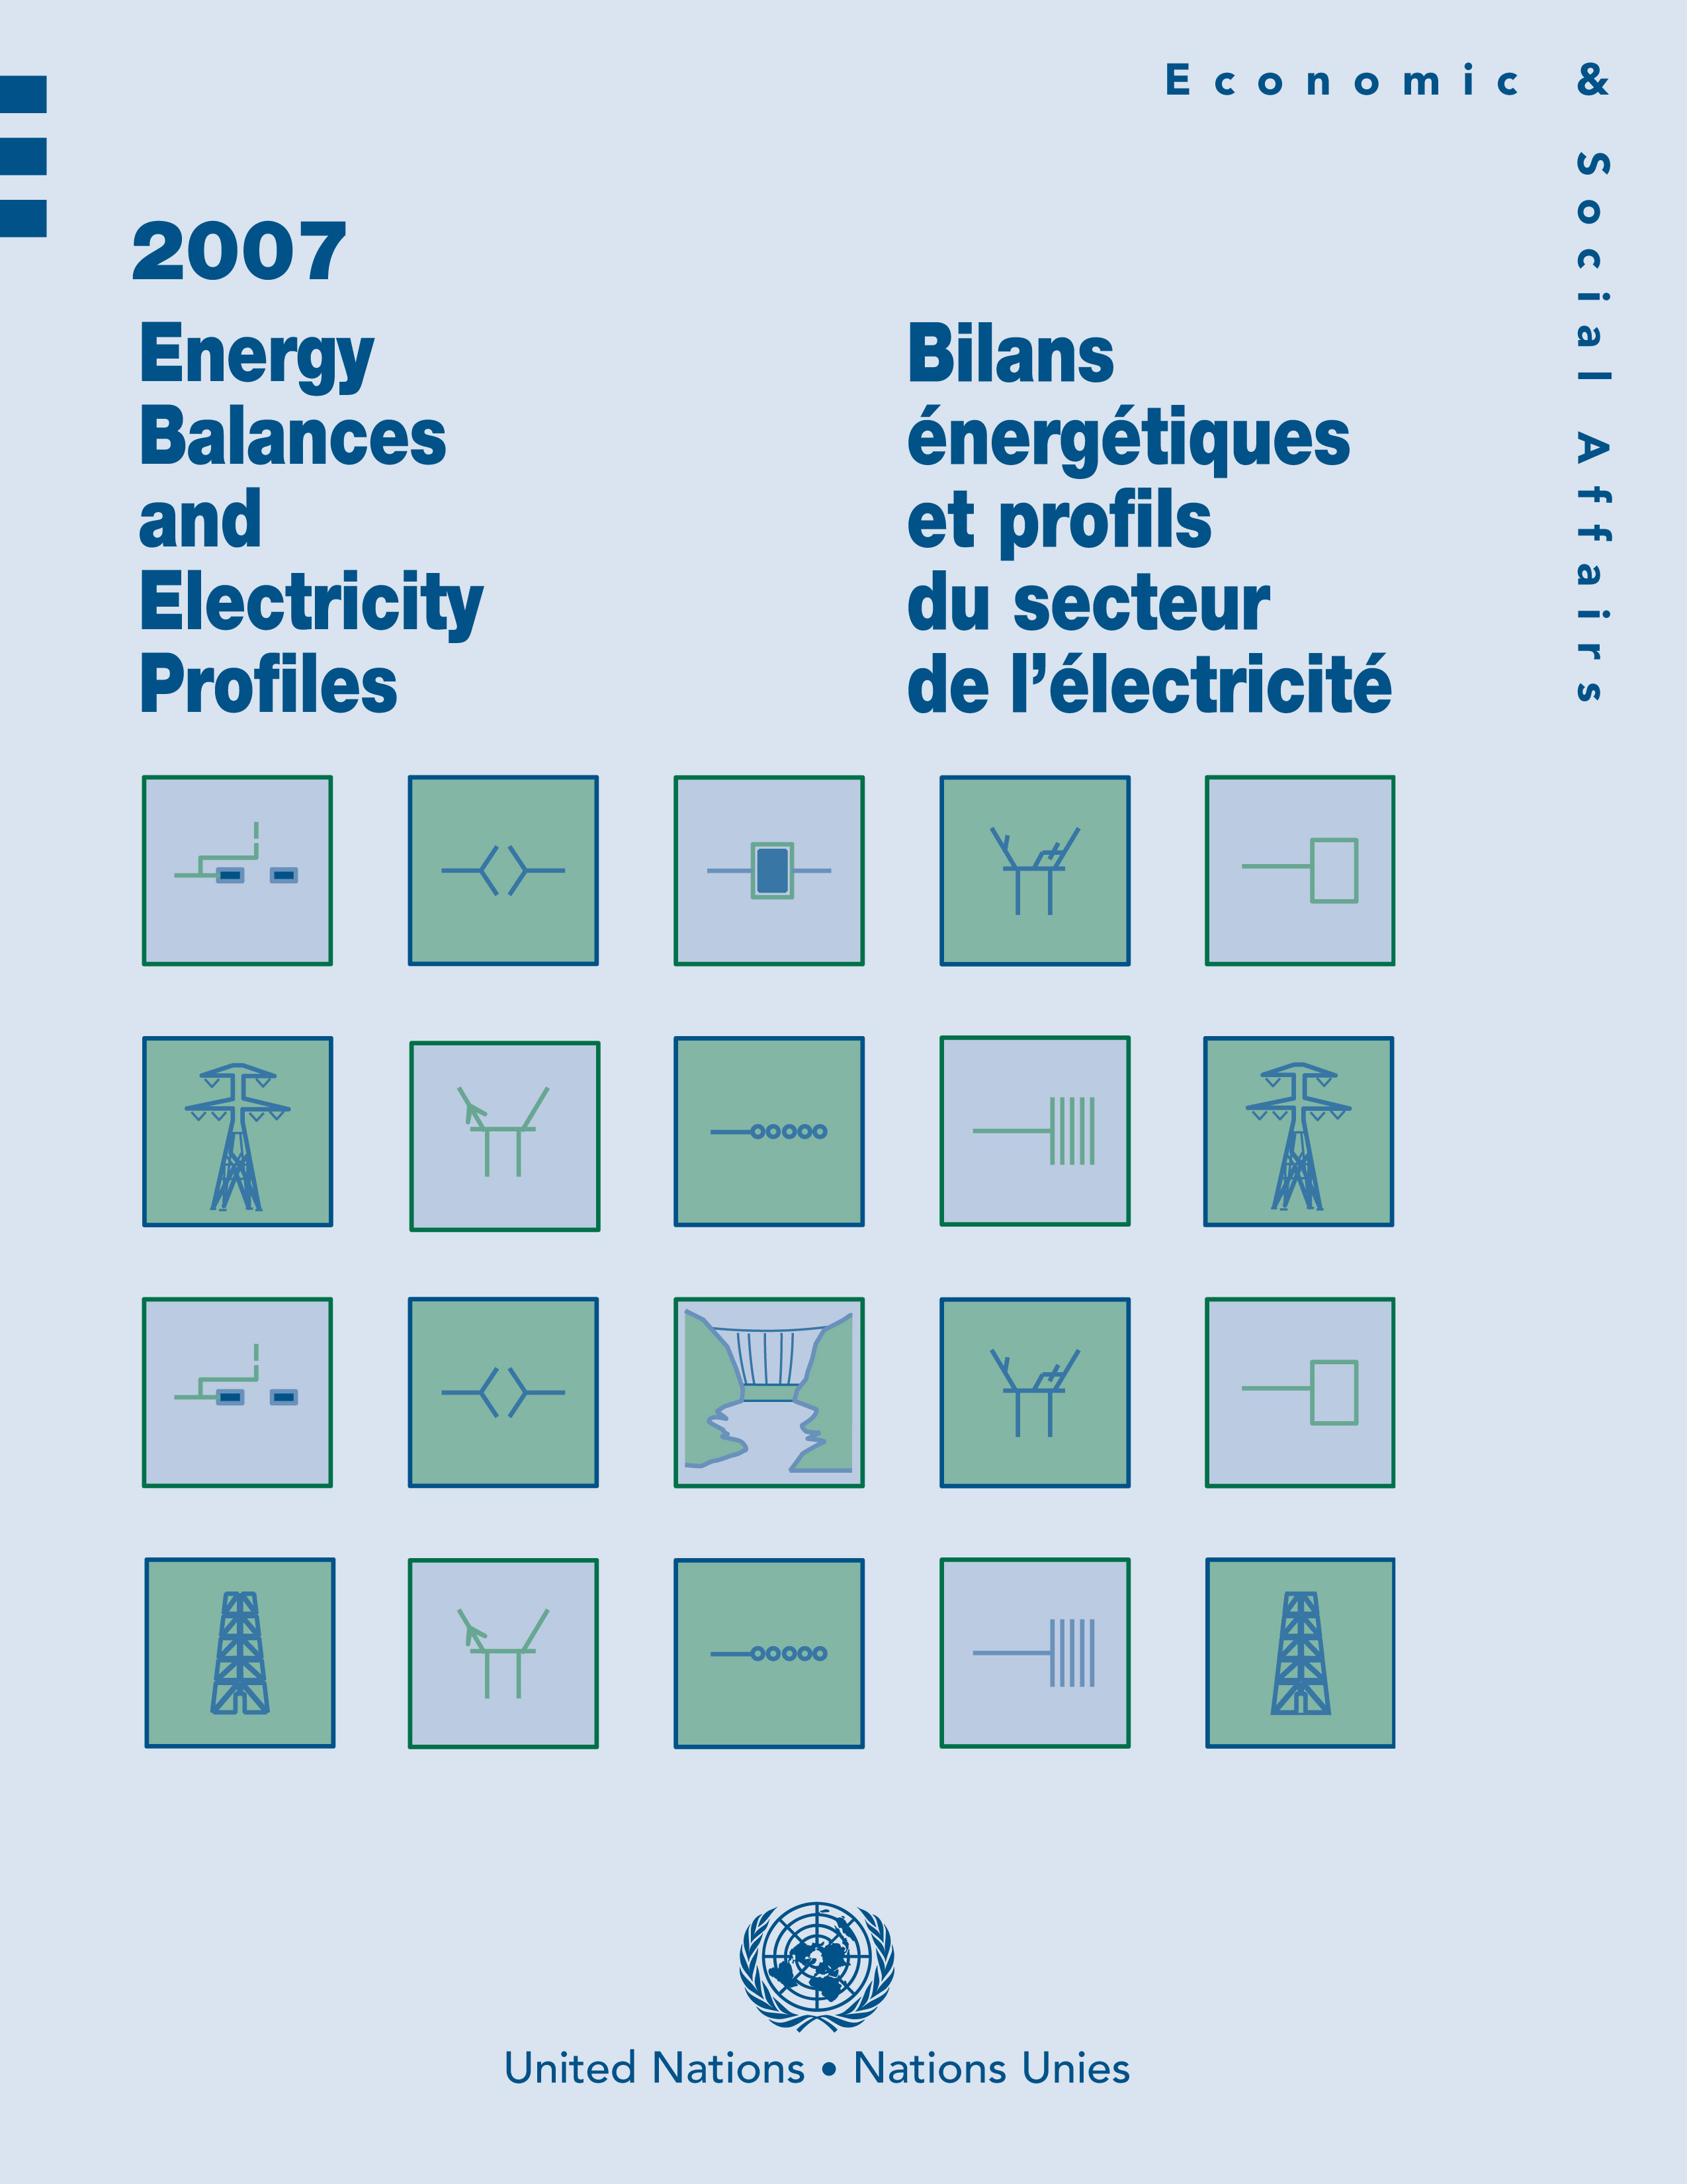 image of Energy Balances and Electricity Profiles 2007